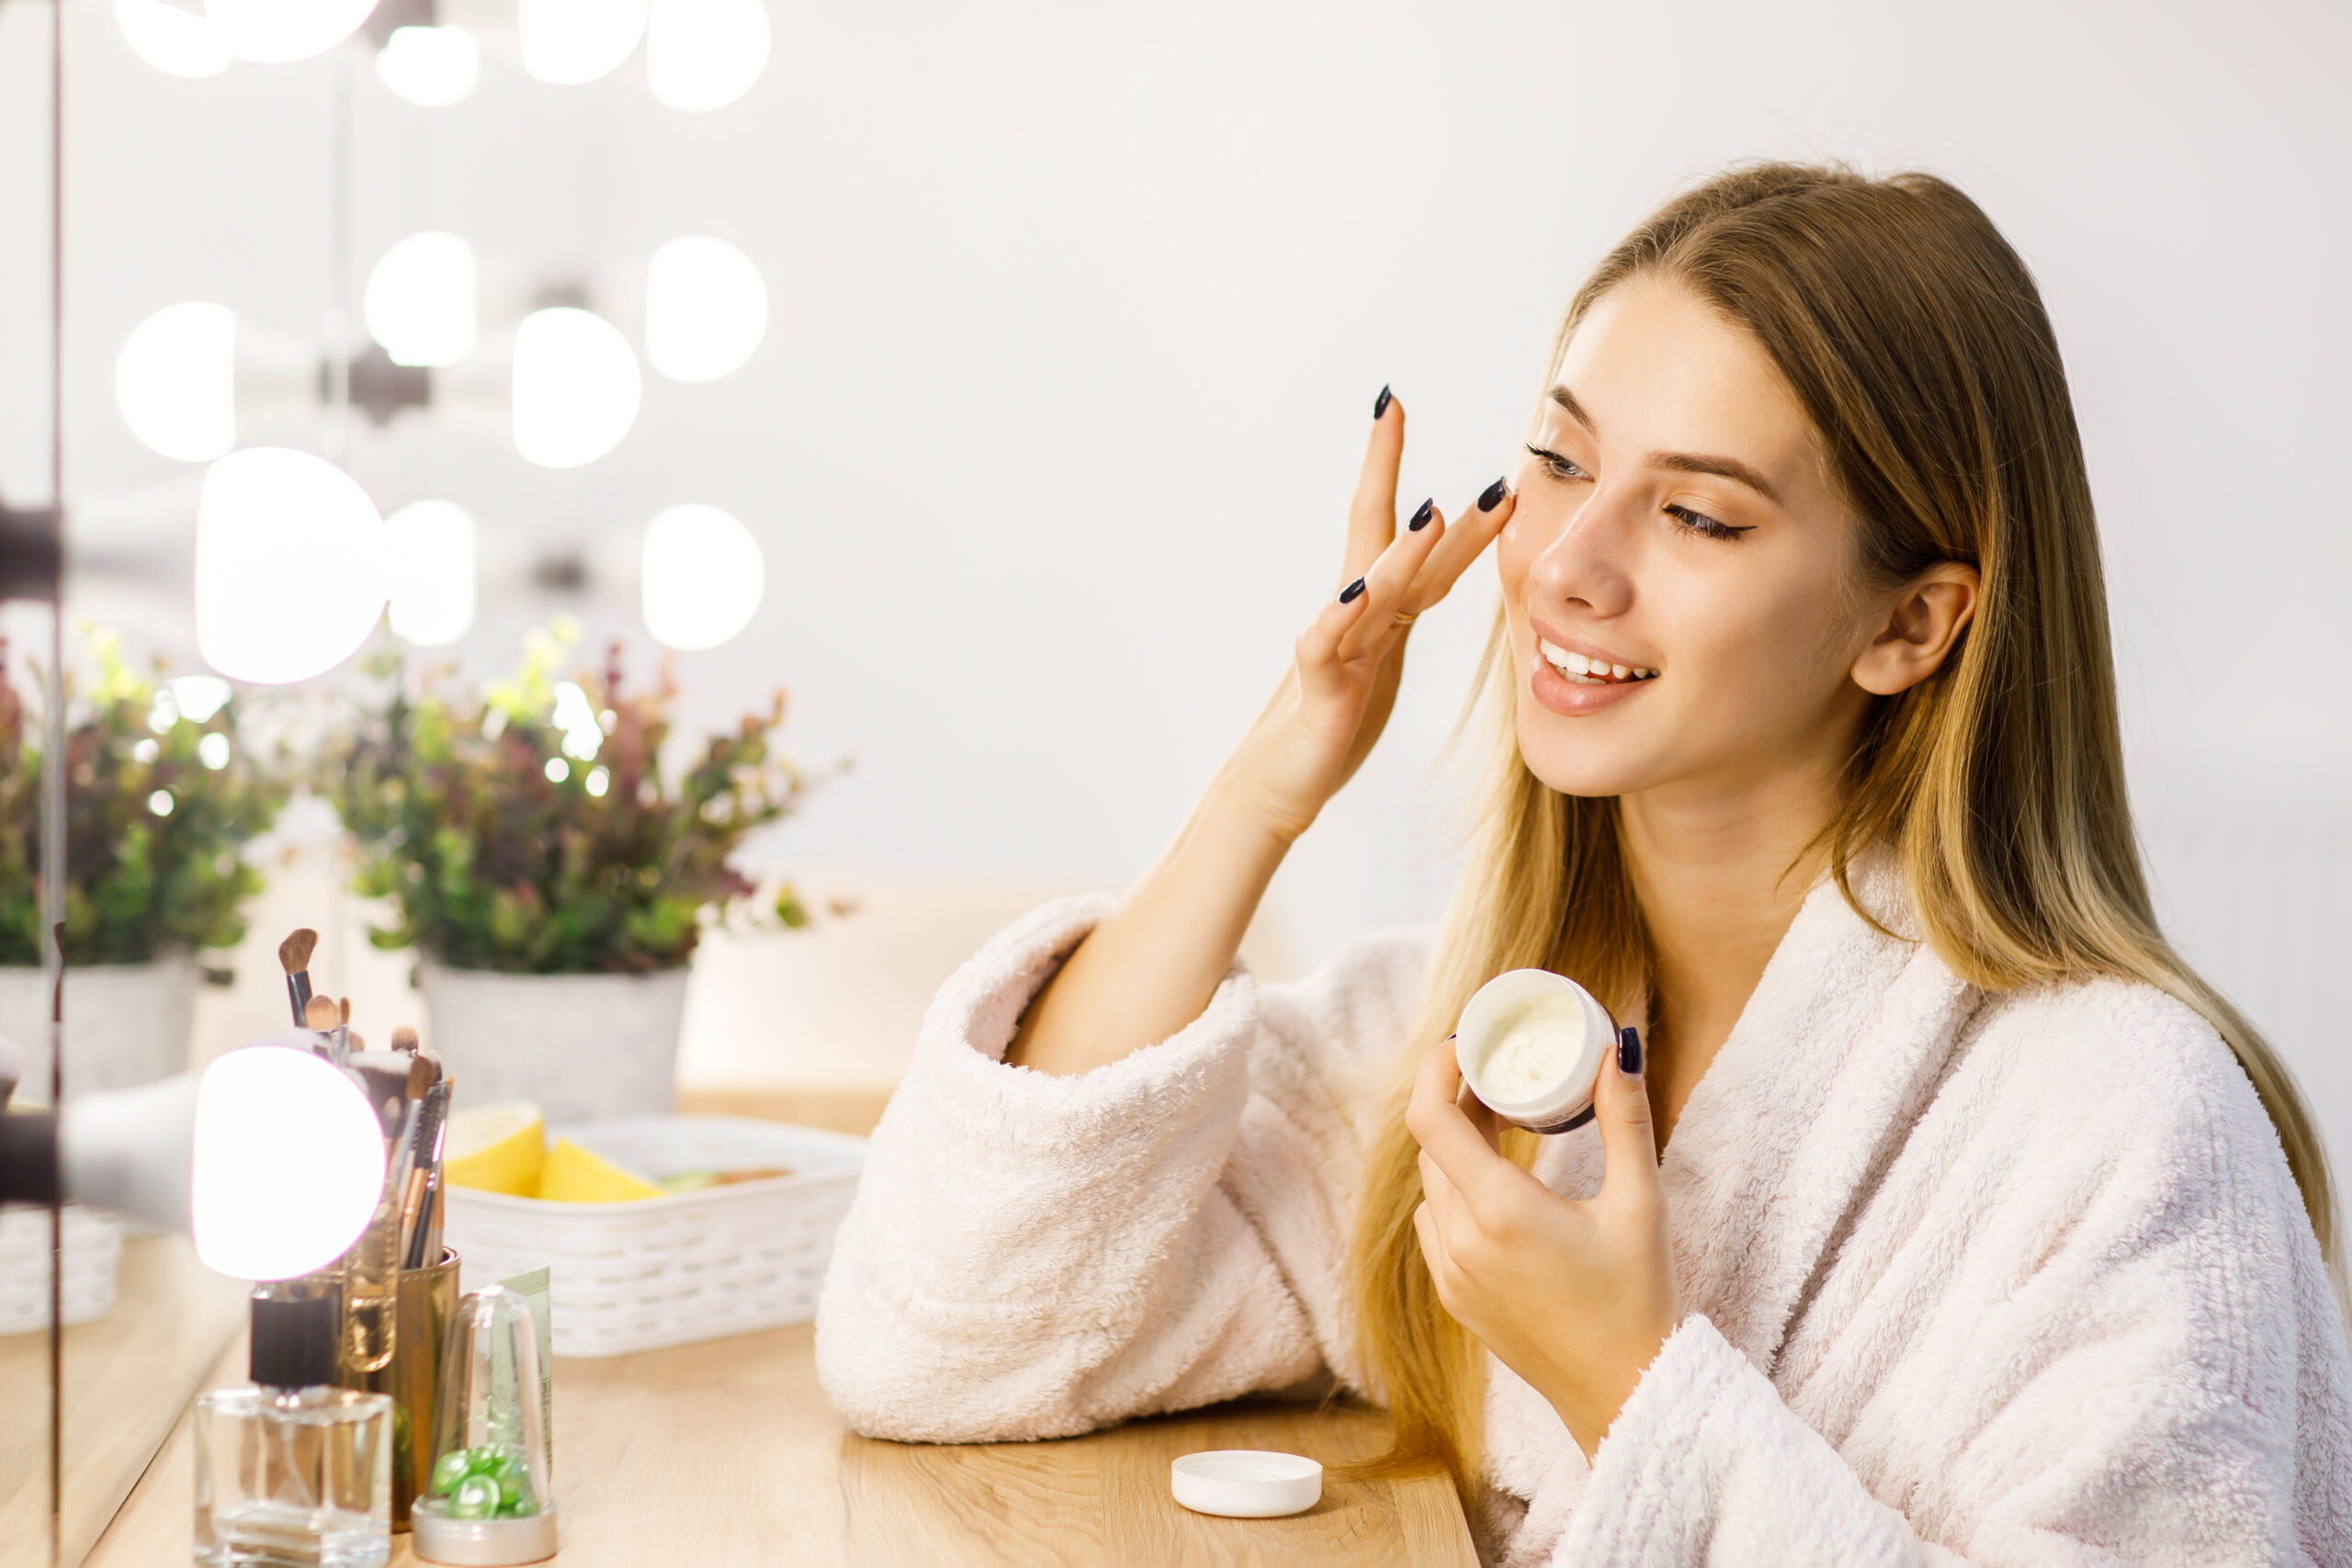 Beauty Tips for Those in Their 20s and What to Include in Their Rituals